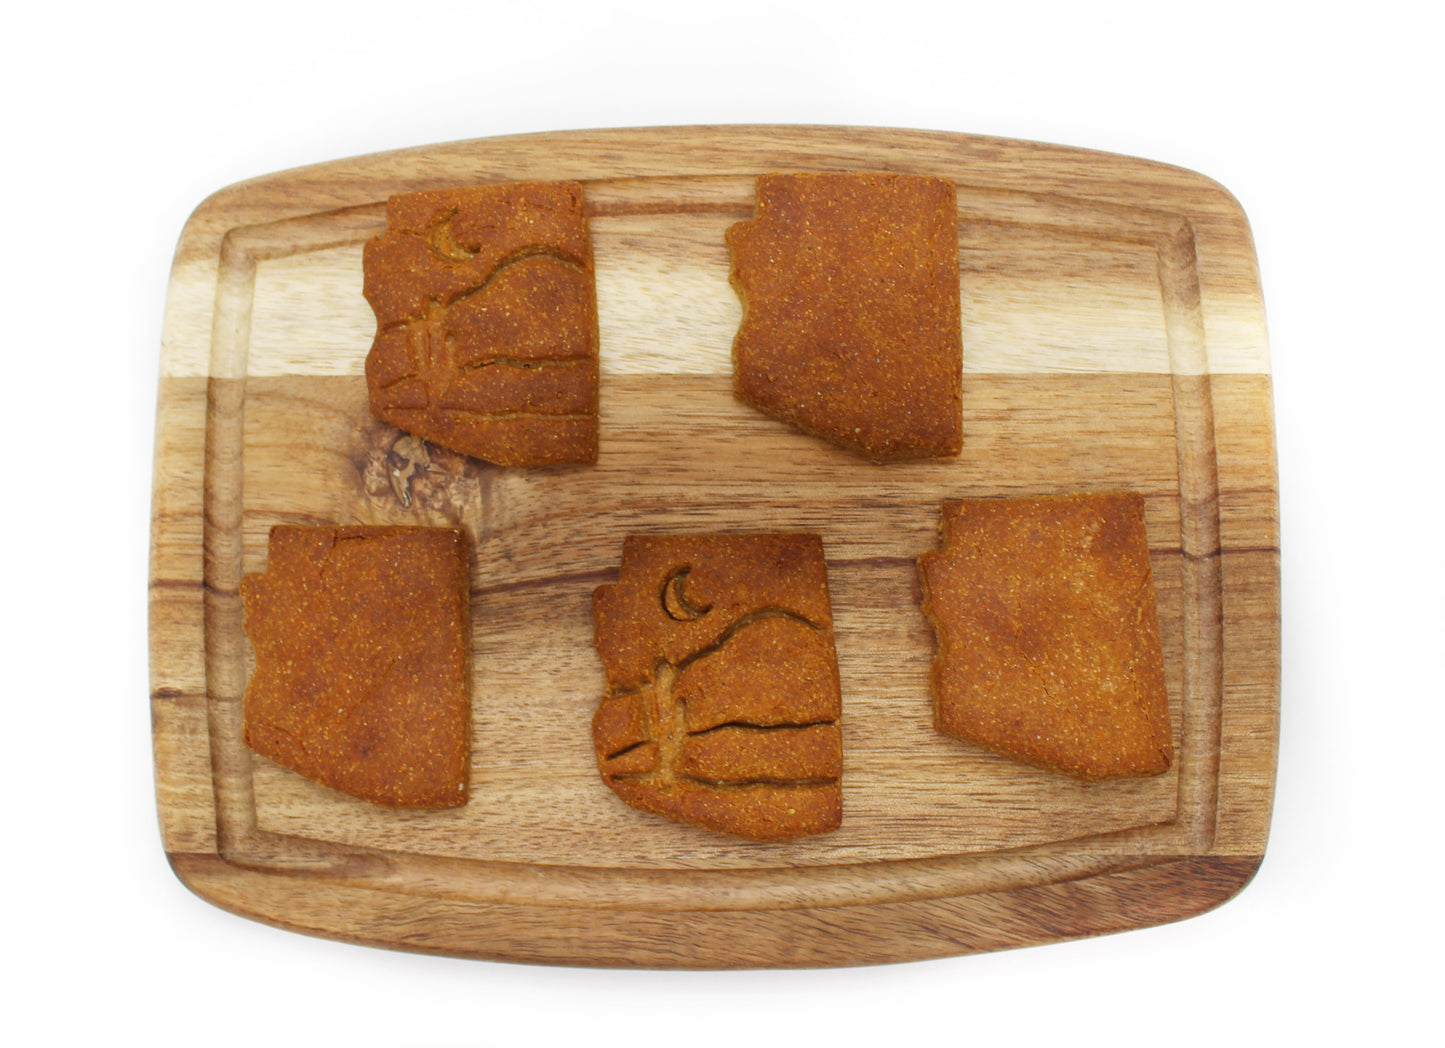 Five peanut butter and banana flavor dog biscuits cut in the shape of the state of Arizona on a cutting board. Two of the biscuits have a desert themed stamp of a moon, mountains, and a cactus.